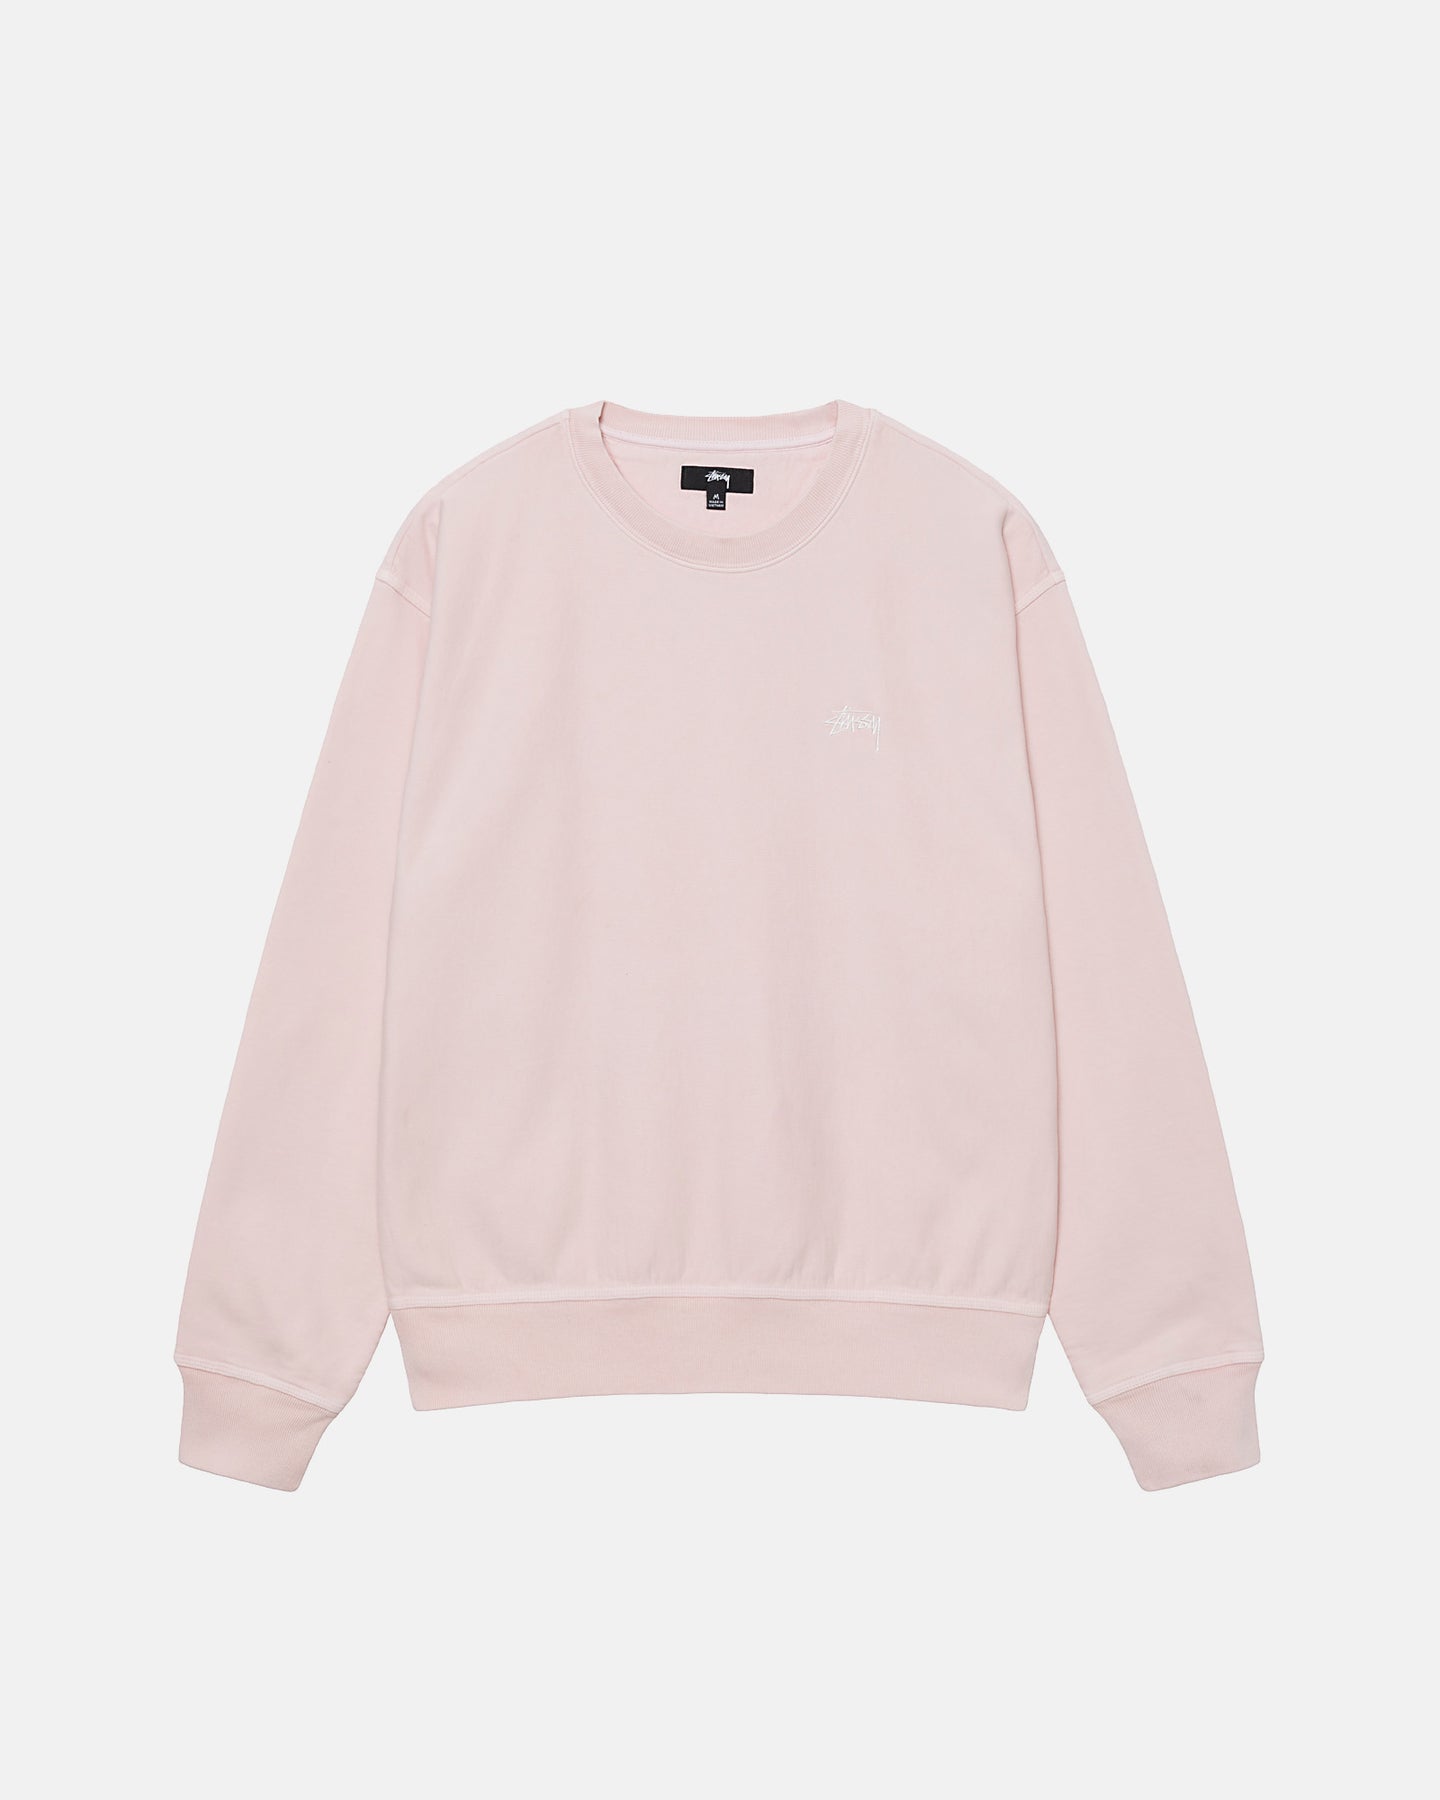 Overdyed: Dry Cotton, Overdyed Fleece and Tees by Stüssy